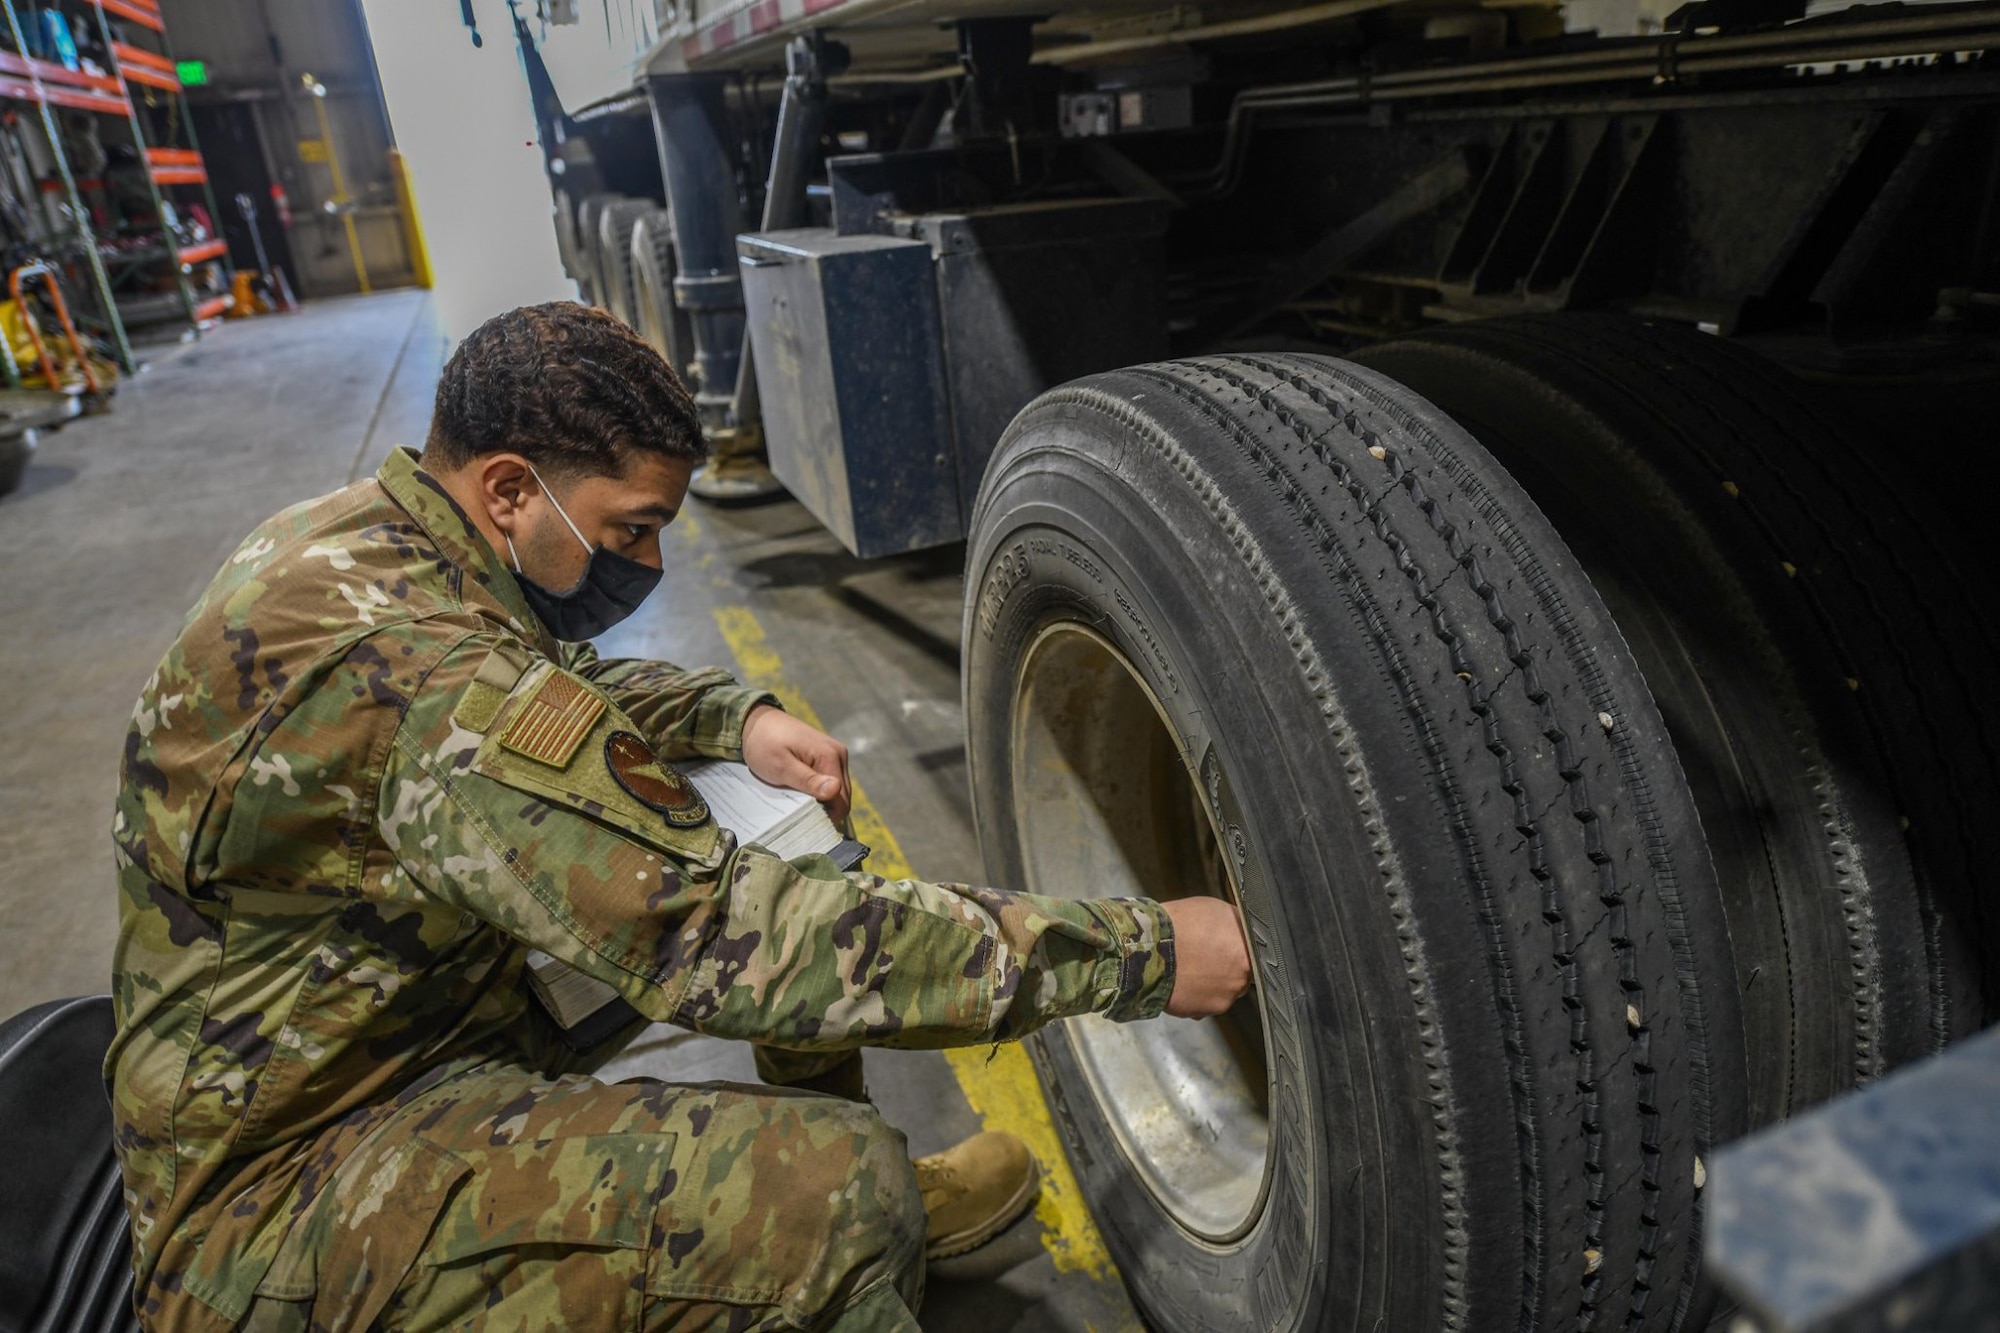 Airmen of Team Minot perform their duties to accomplish the mission of Strategic Deterrence.